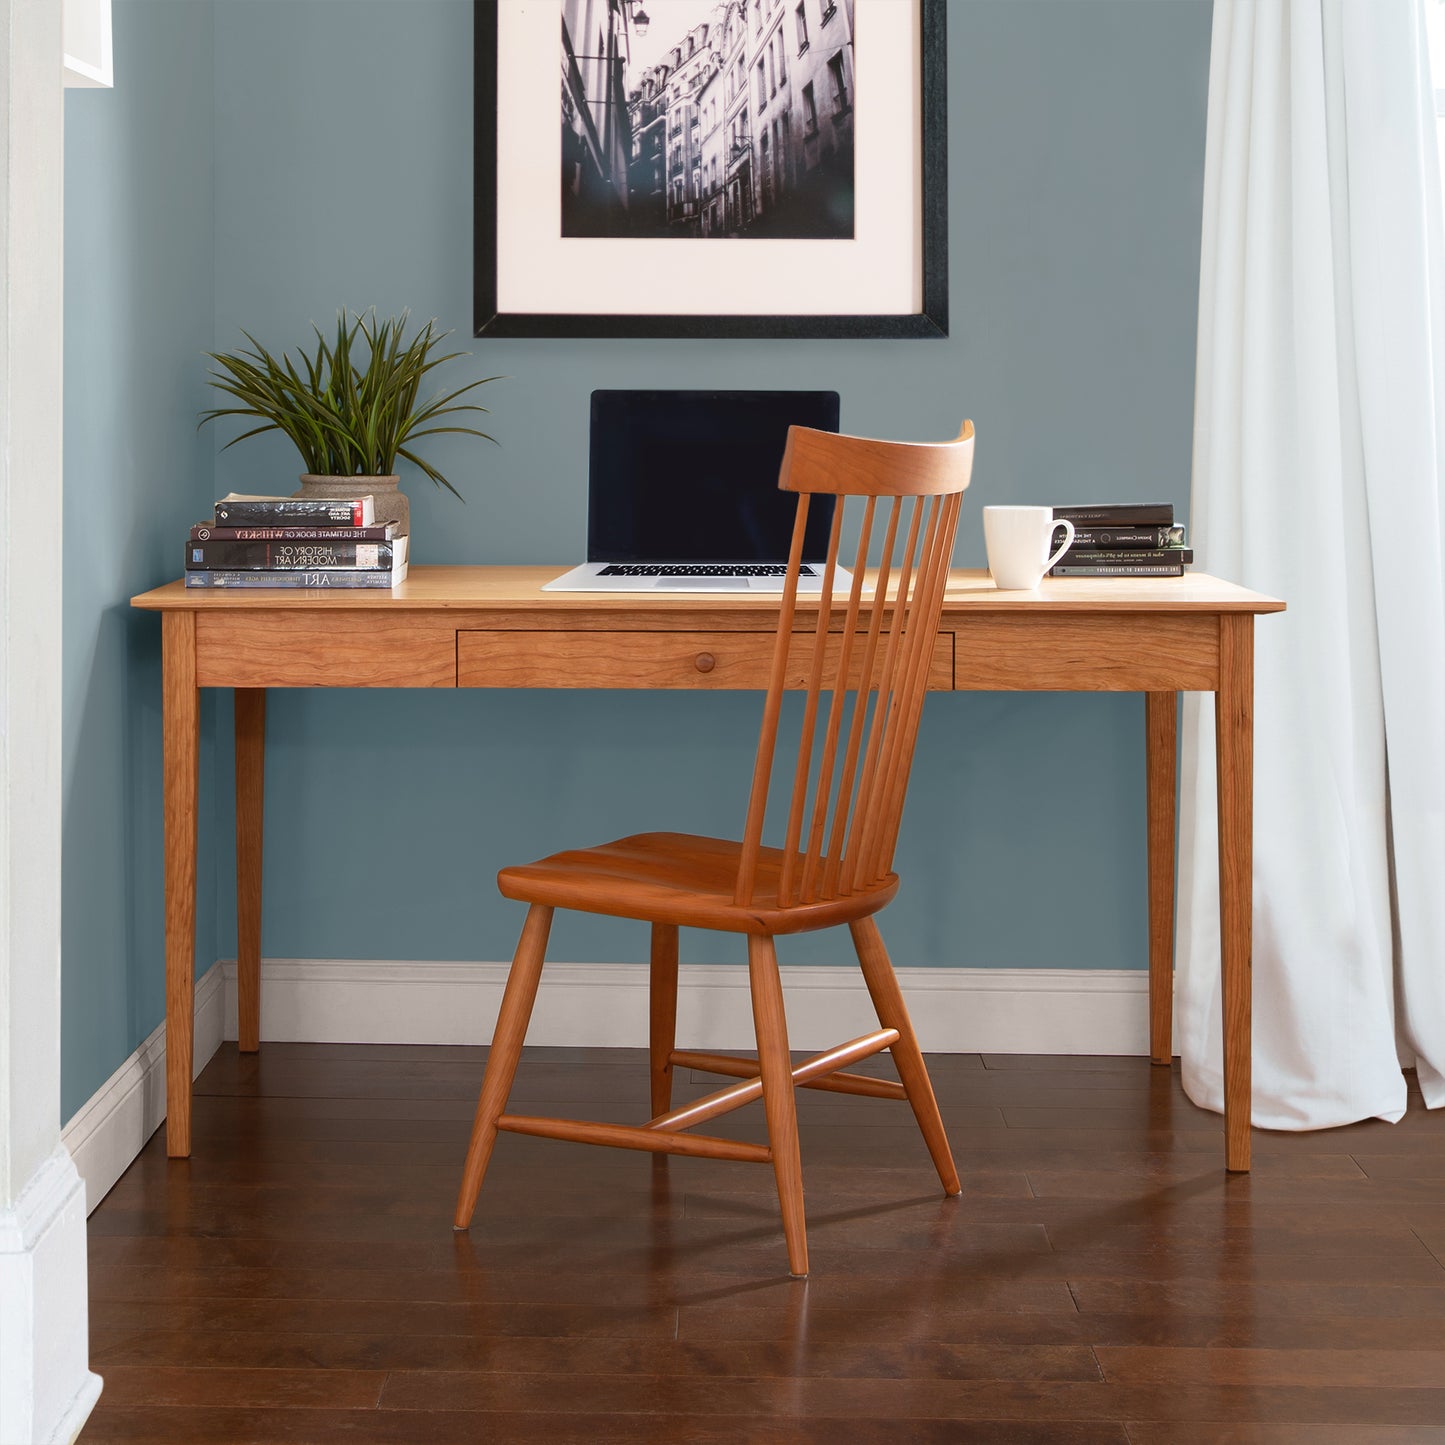 A Maple Corner Woodworks American Shaker Writing Desk and chair made of sustainable hardwood in a room with blue walls.